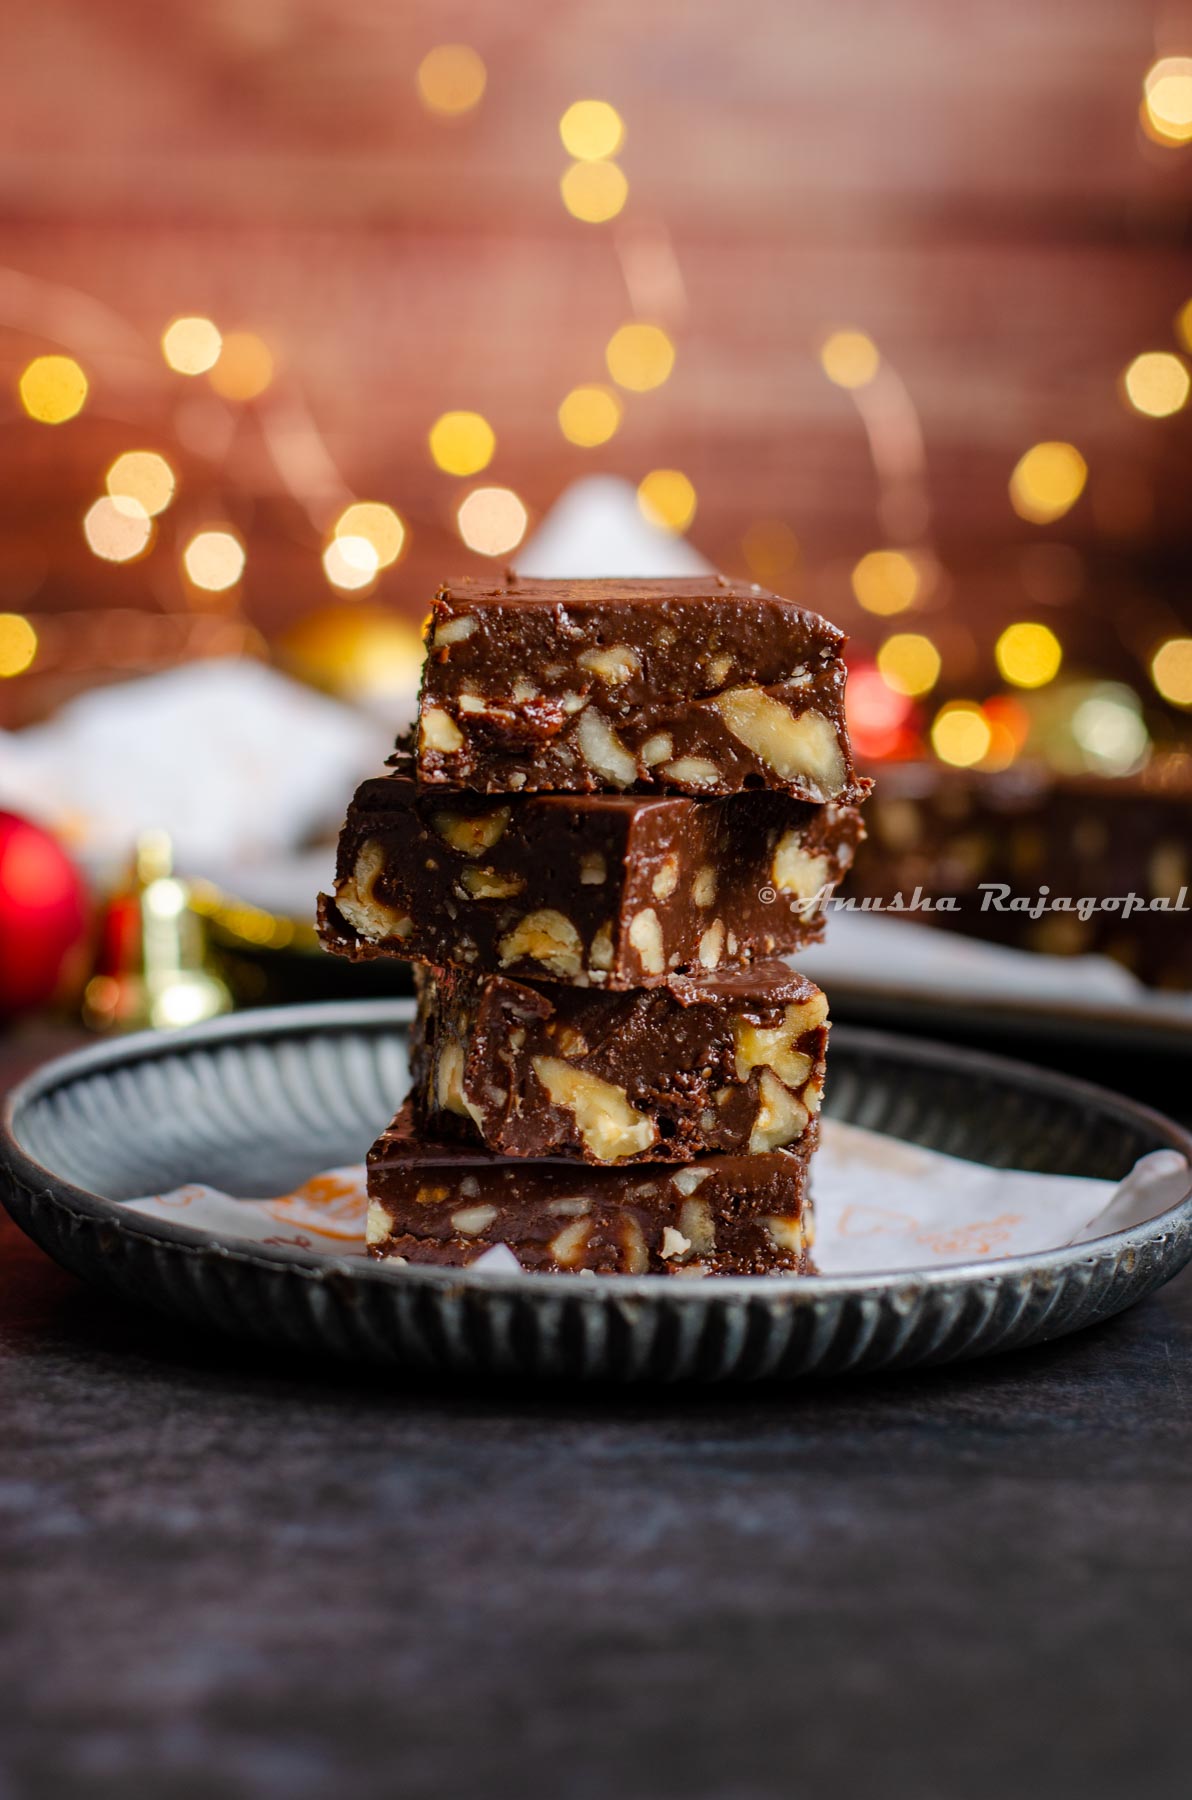 Instant pot fudge stacked over a piece of parchment paper placed on a rustic metal tray. Christmas ornaments placed at the back. Fairy lights not in focus.